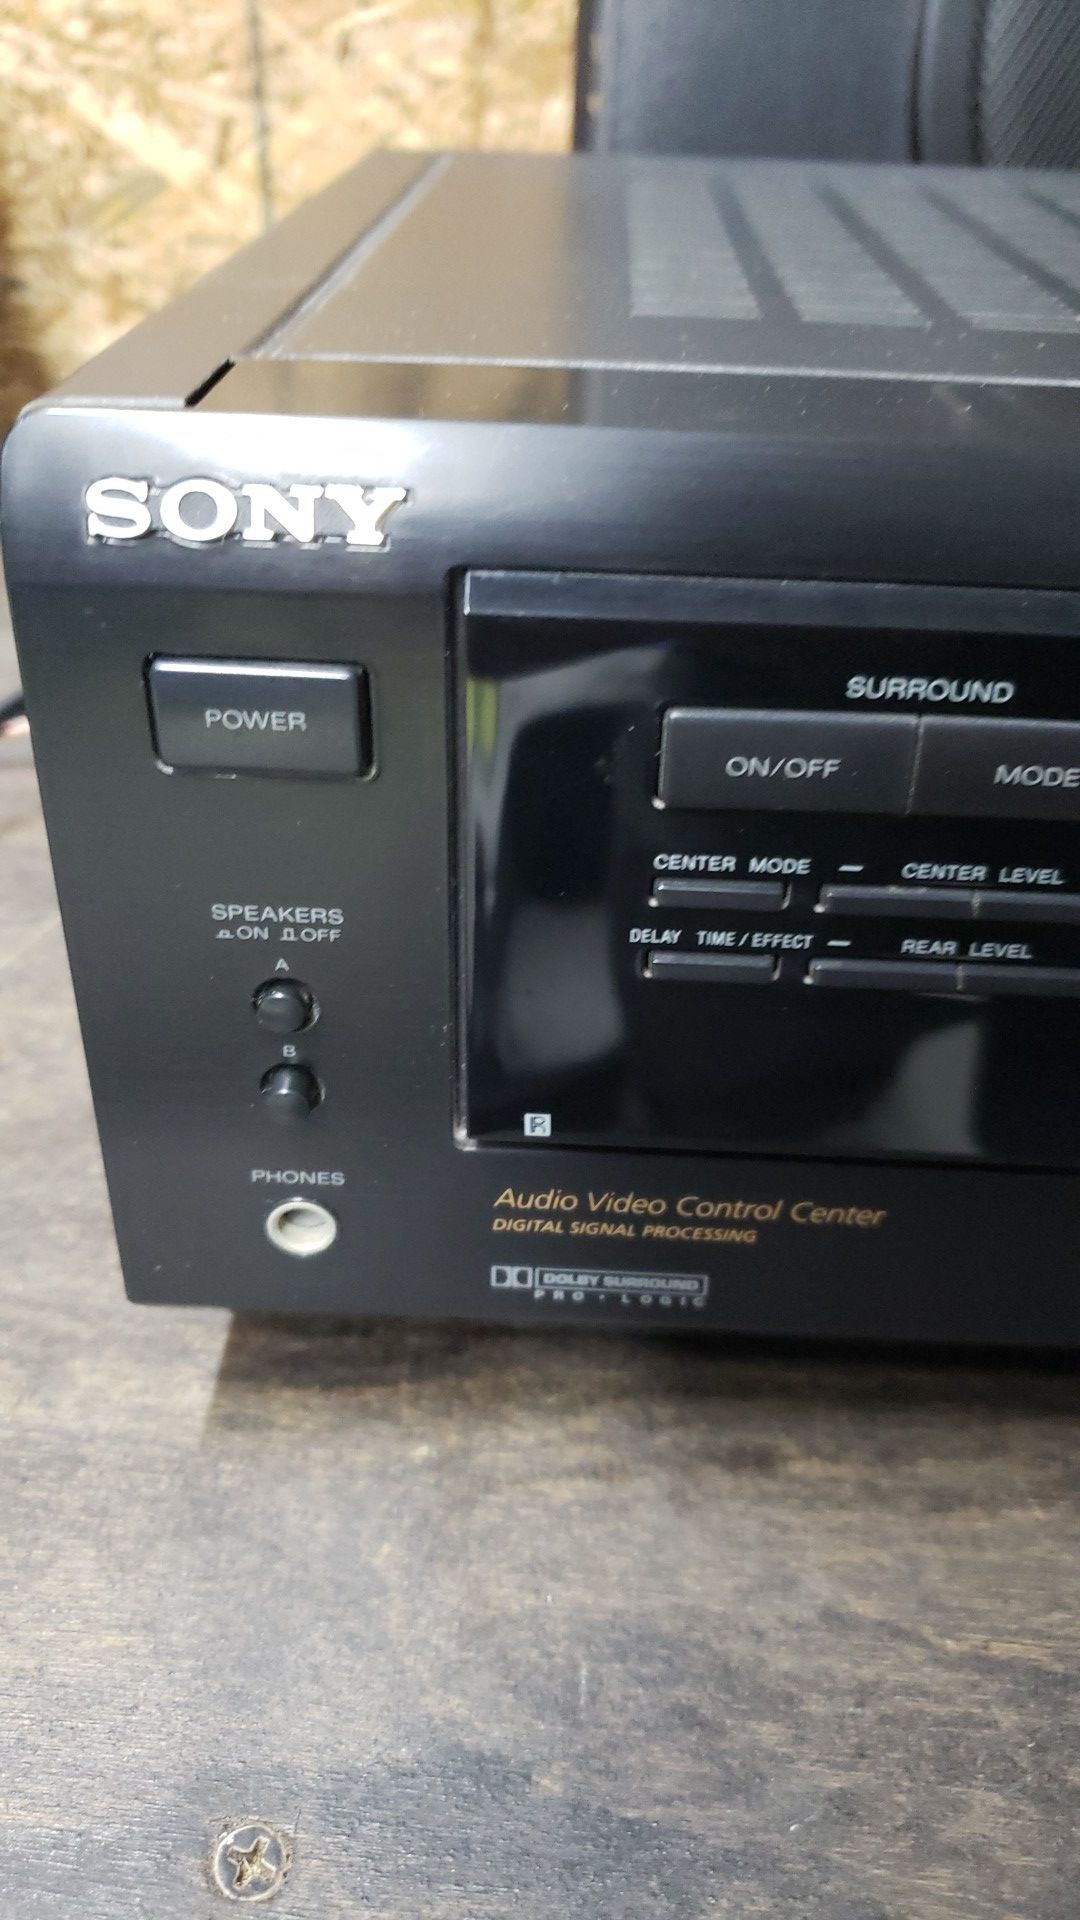 Sony home theater receiver